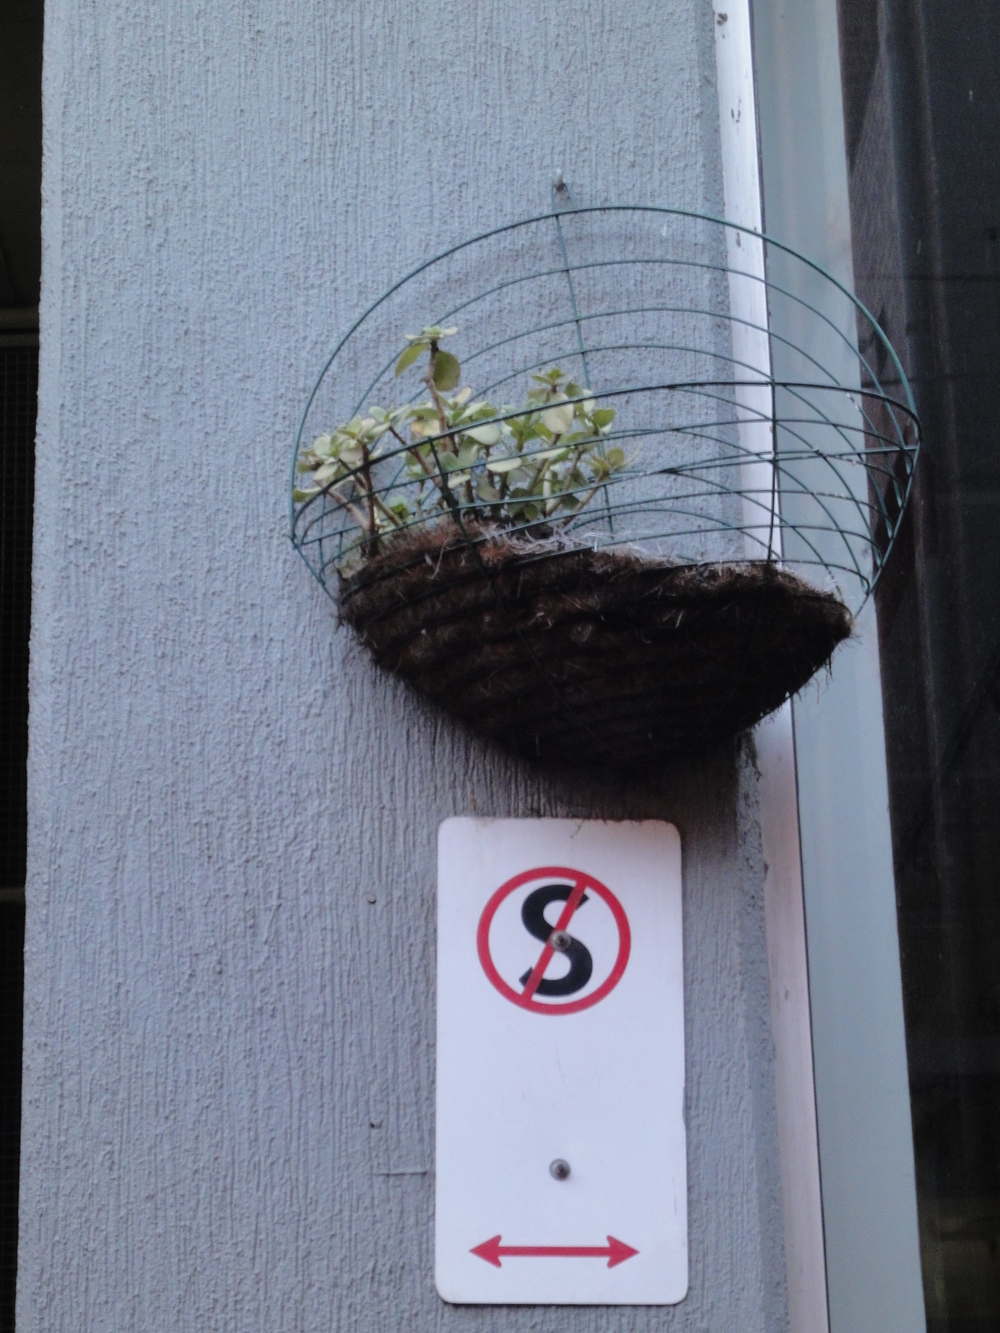 The irony of a standing plant basket in a 'no standing' zone on Hardware Lane in Melbourne, Australia.